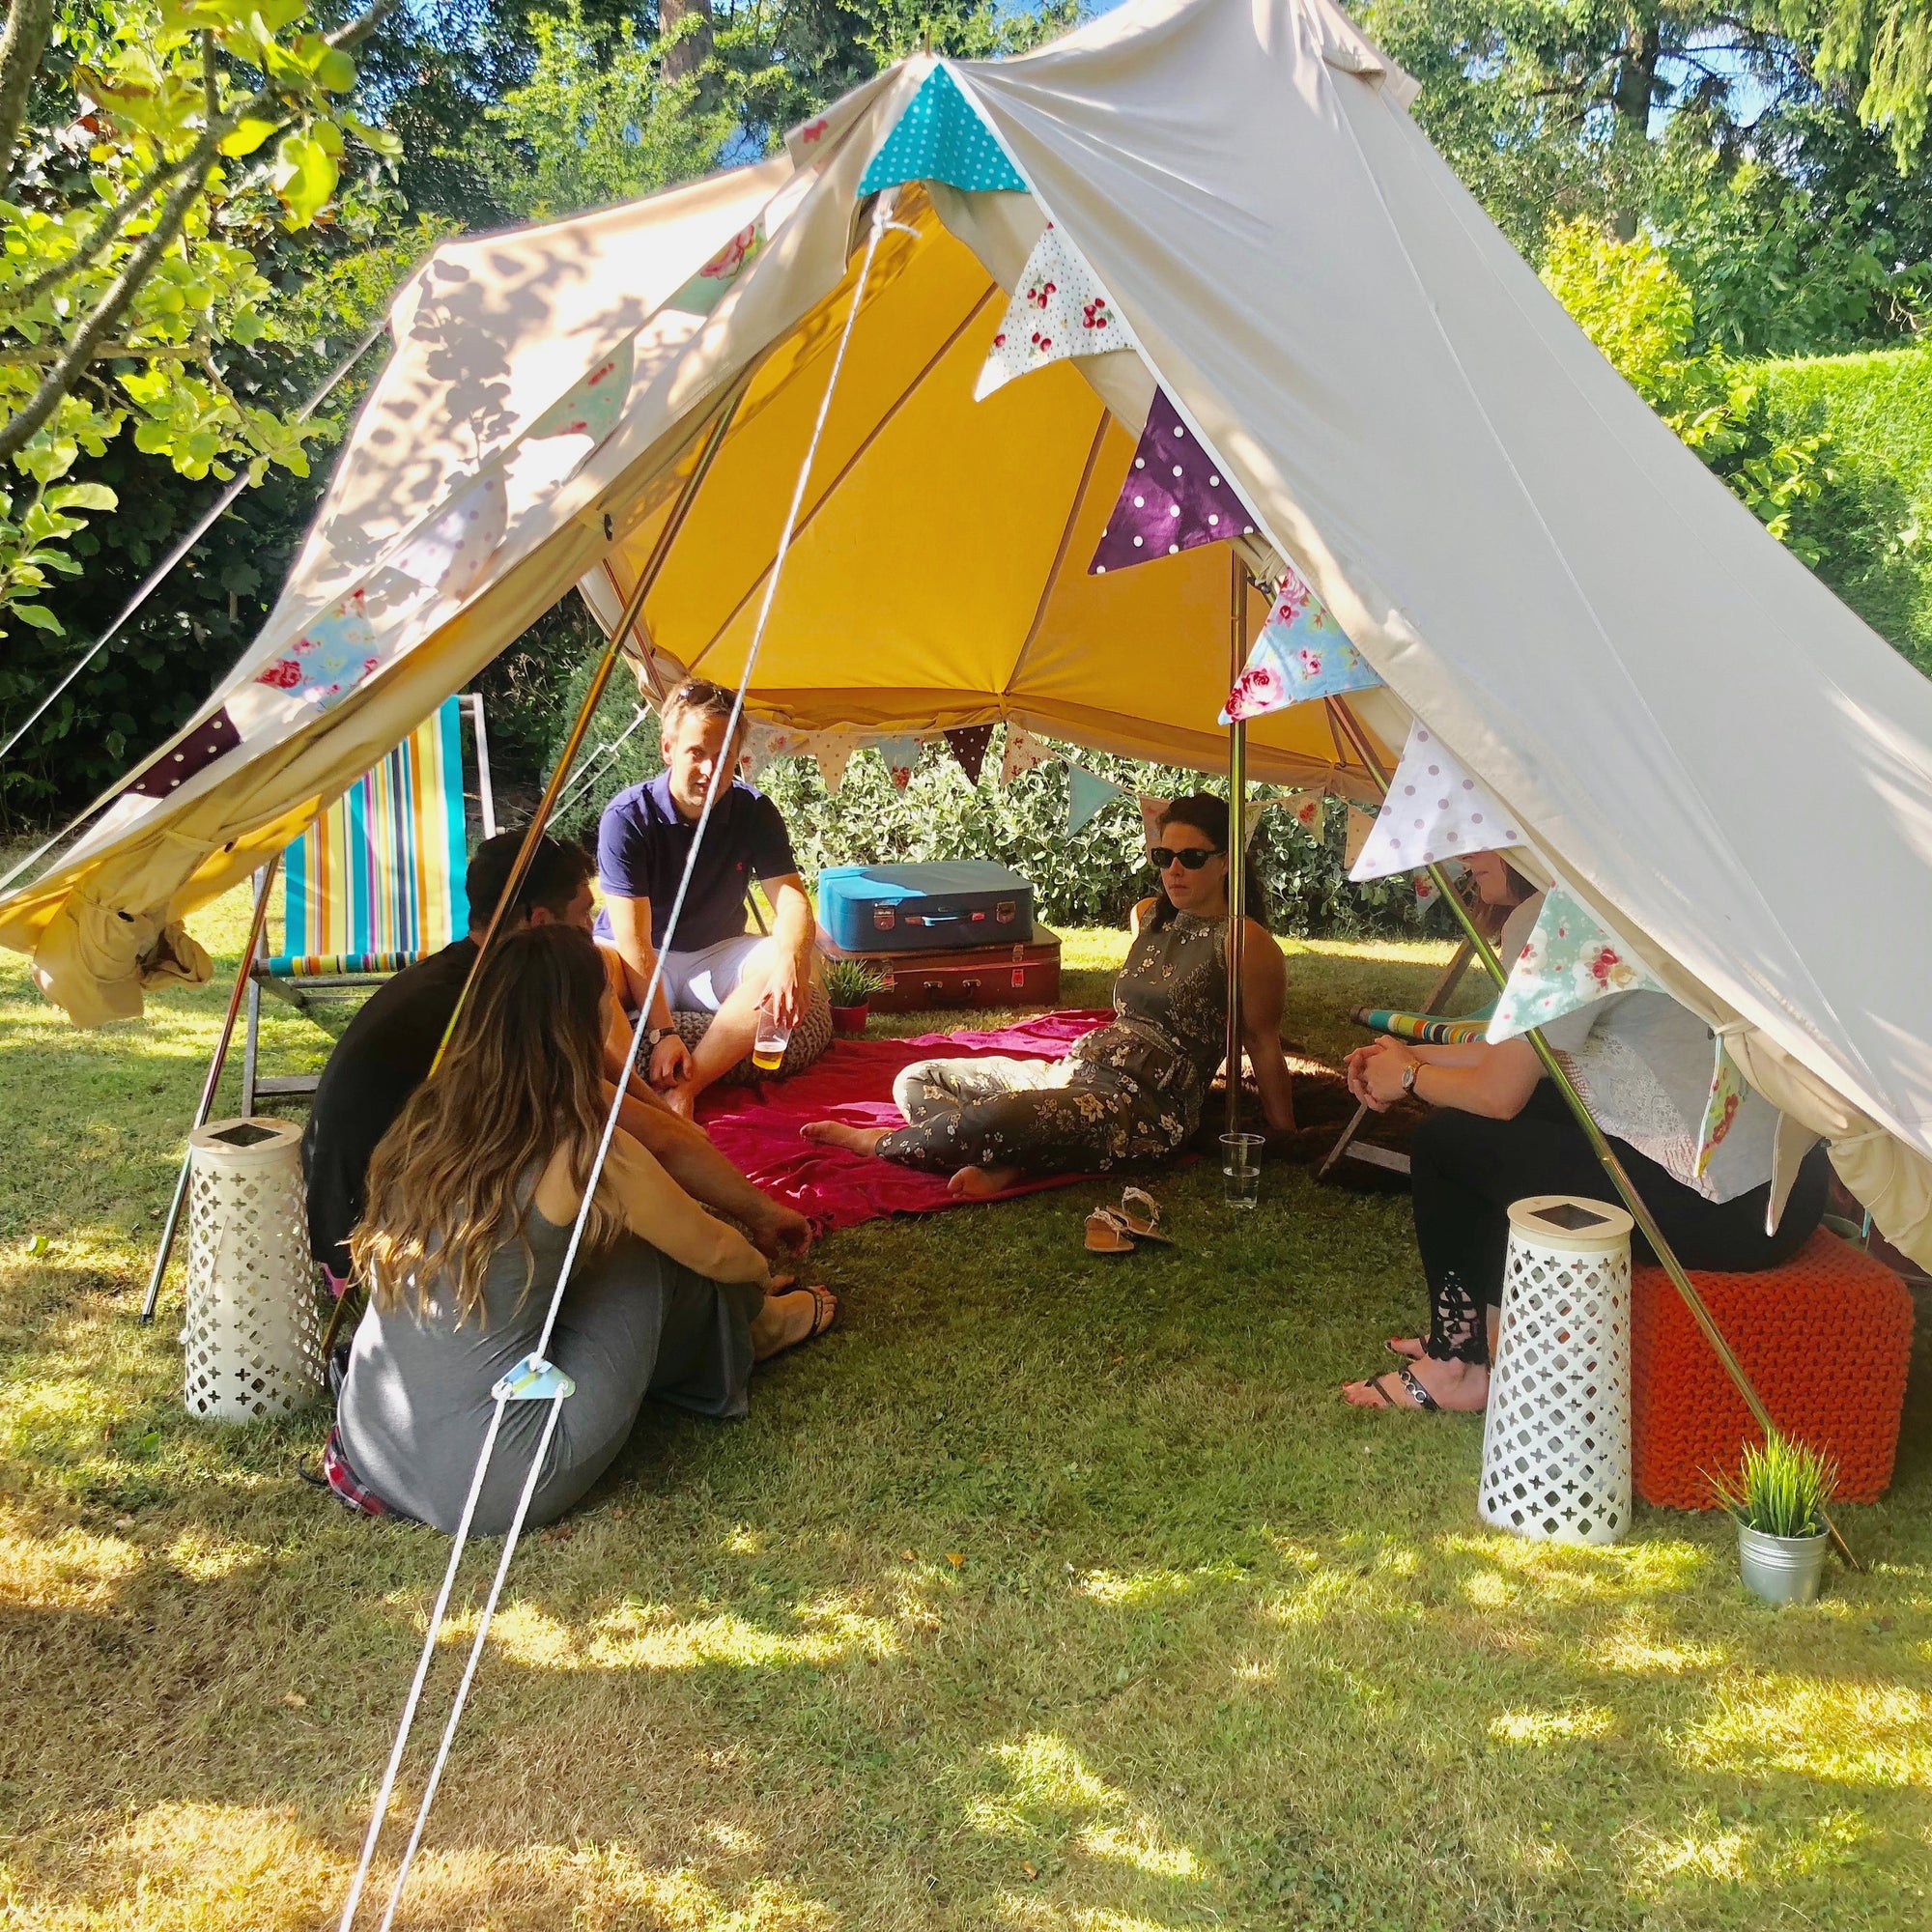 Camping's Coming Home: Bell Tents in the Garden